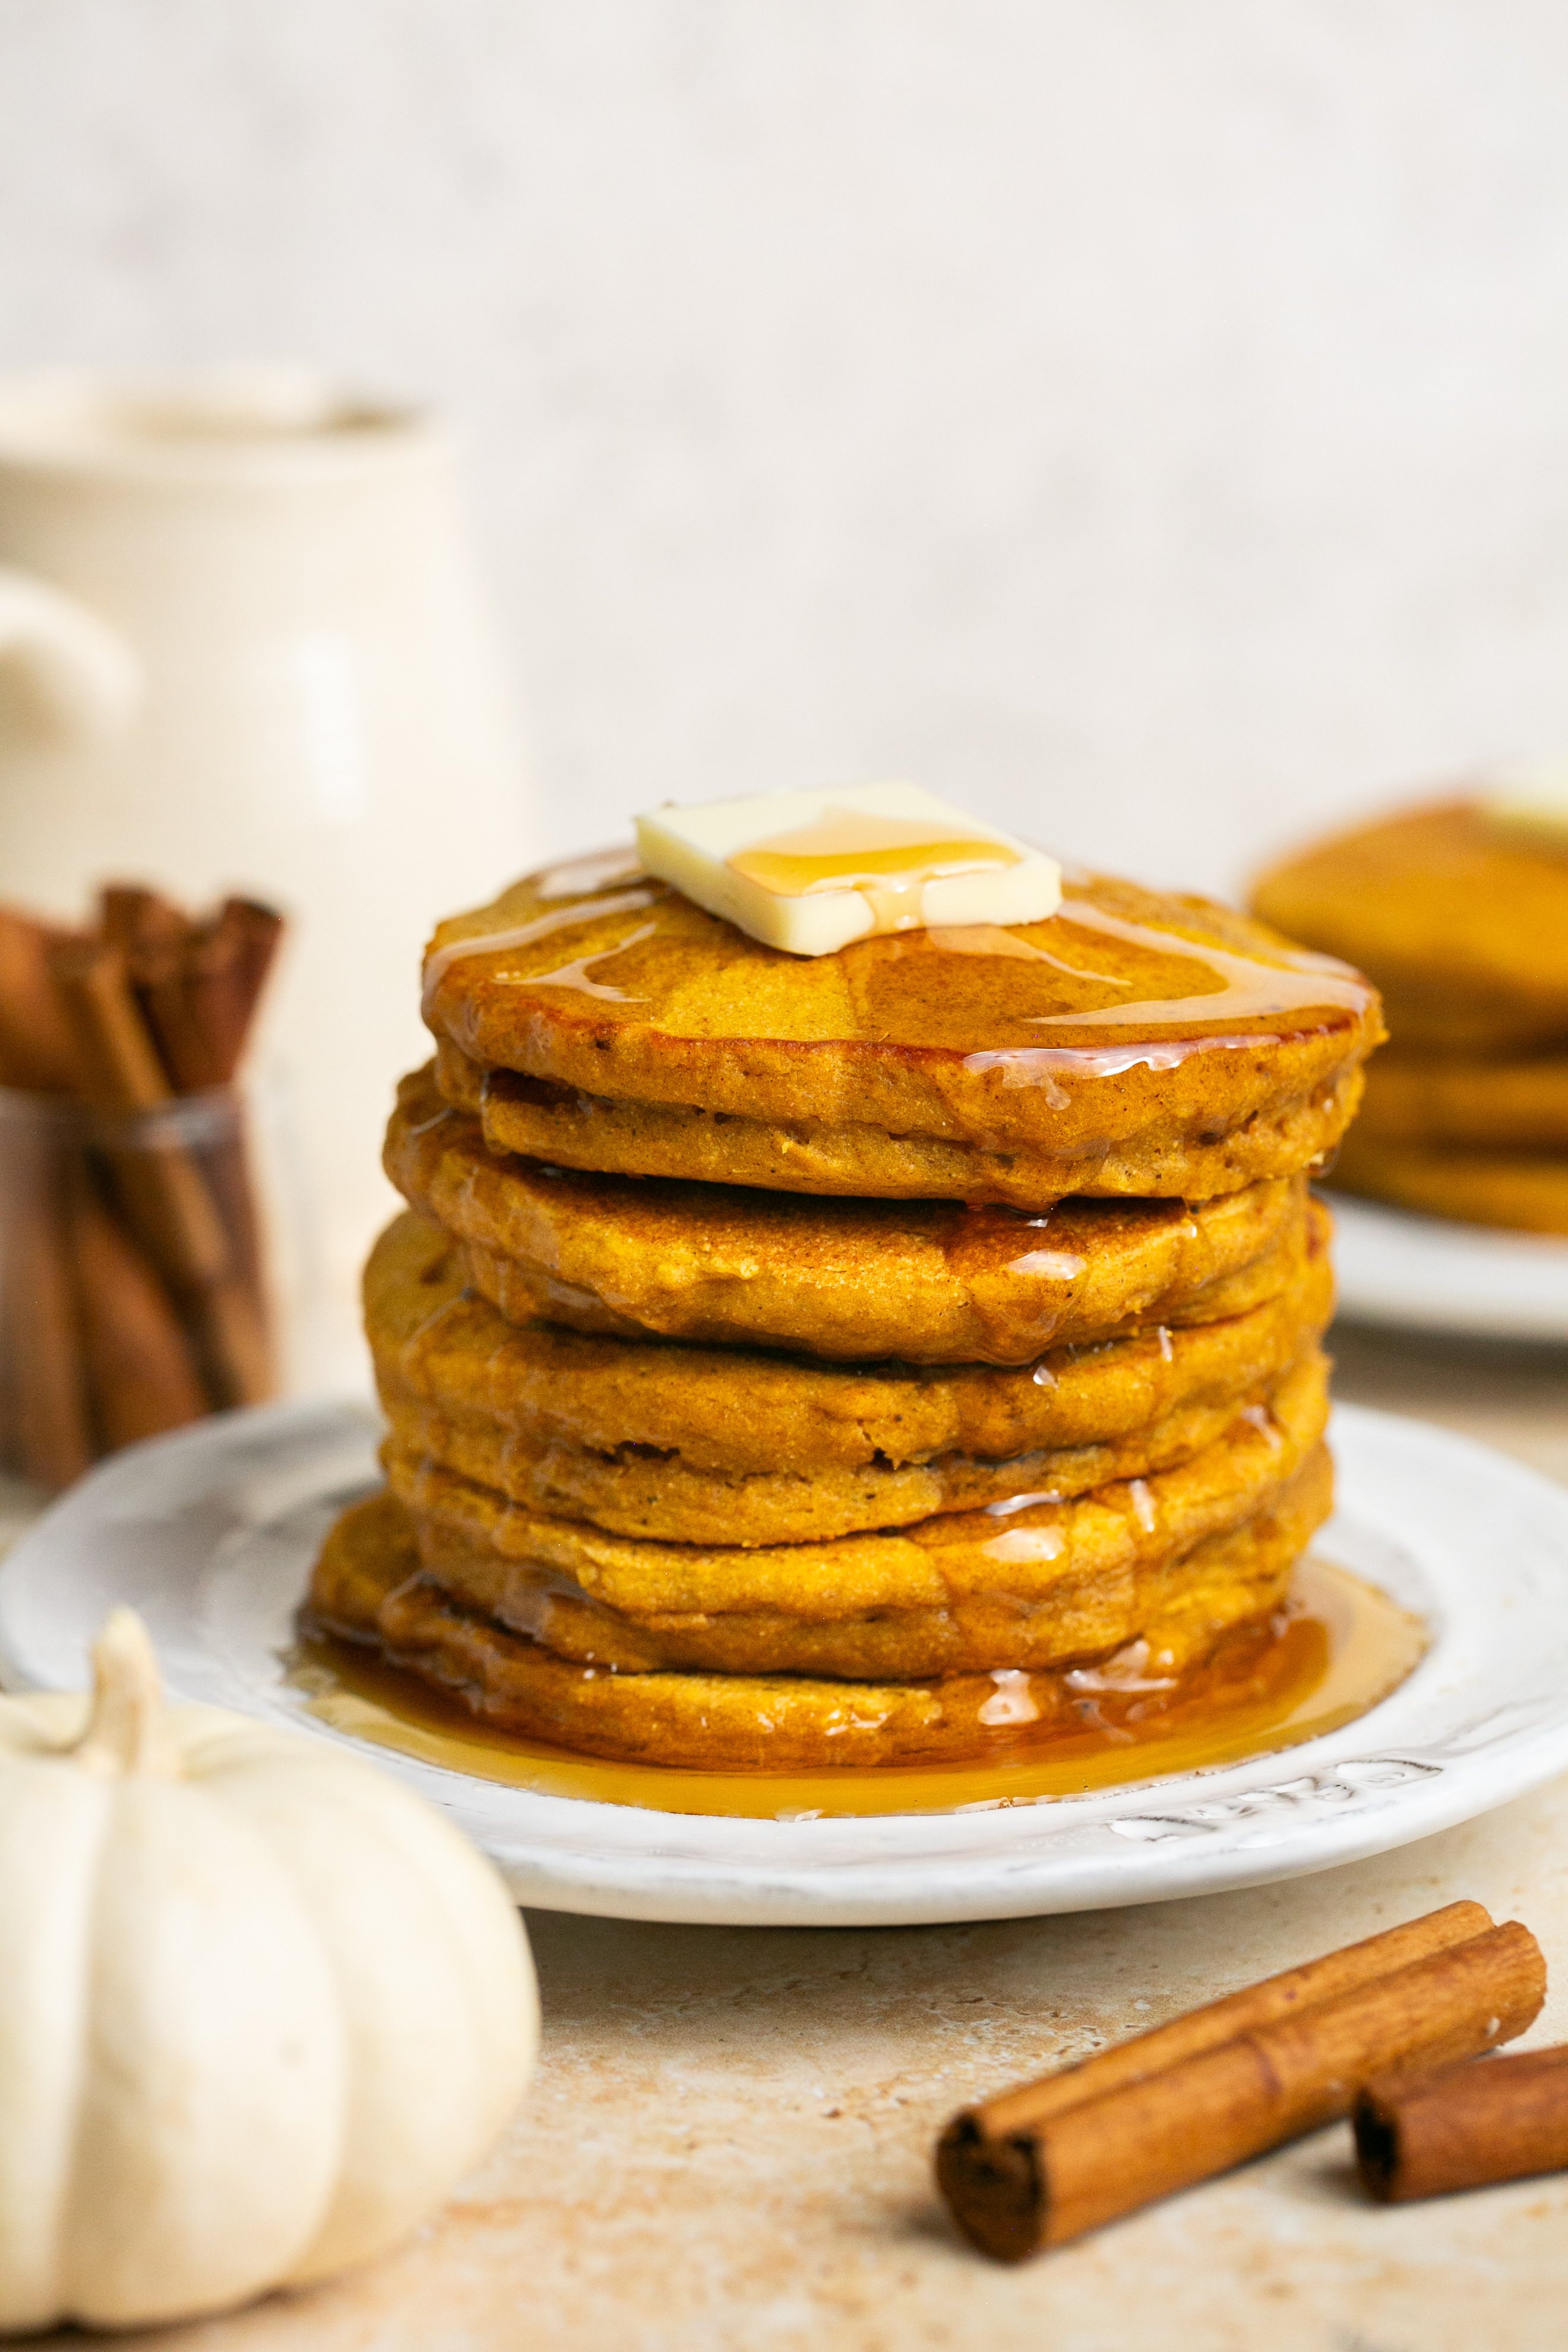 A stack of healthy pumpkin pancakes on a plate topped with a slab of butter and drizzled with maple syrup. There are cinnamon sticks, a white pumpkin, and another stack of pancakes blurred around the main stack.